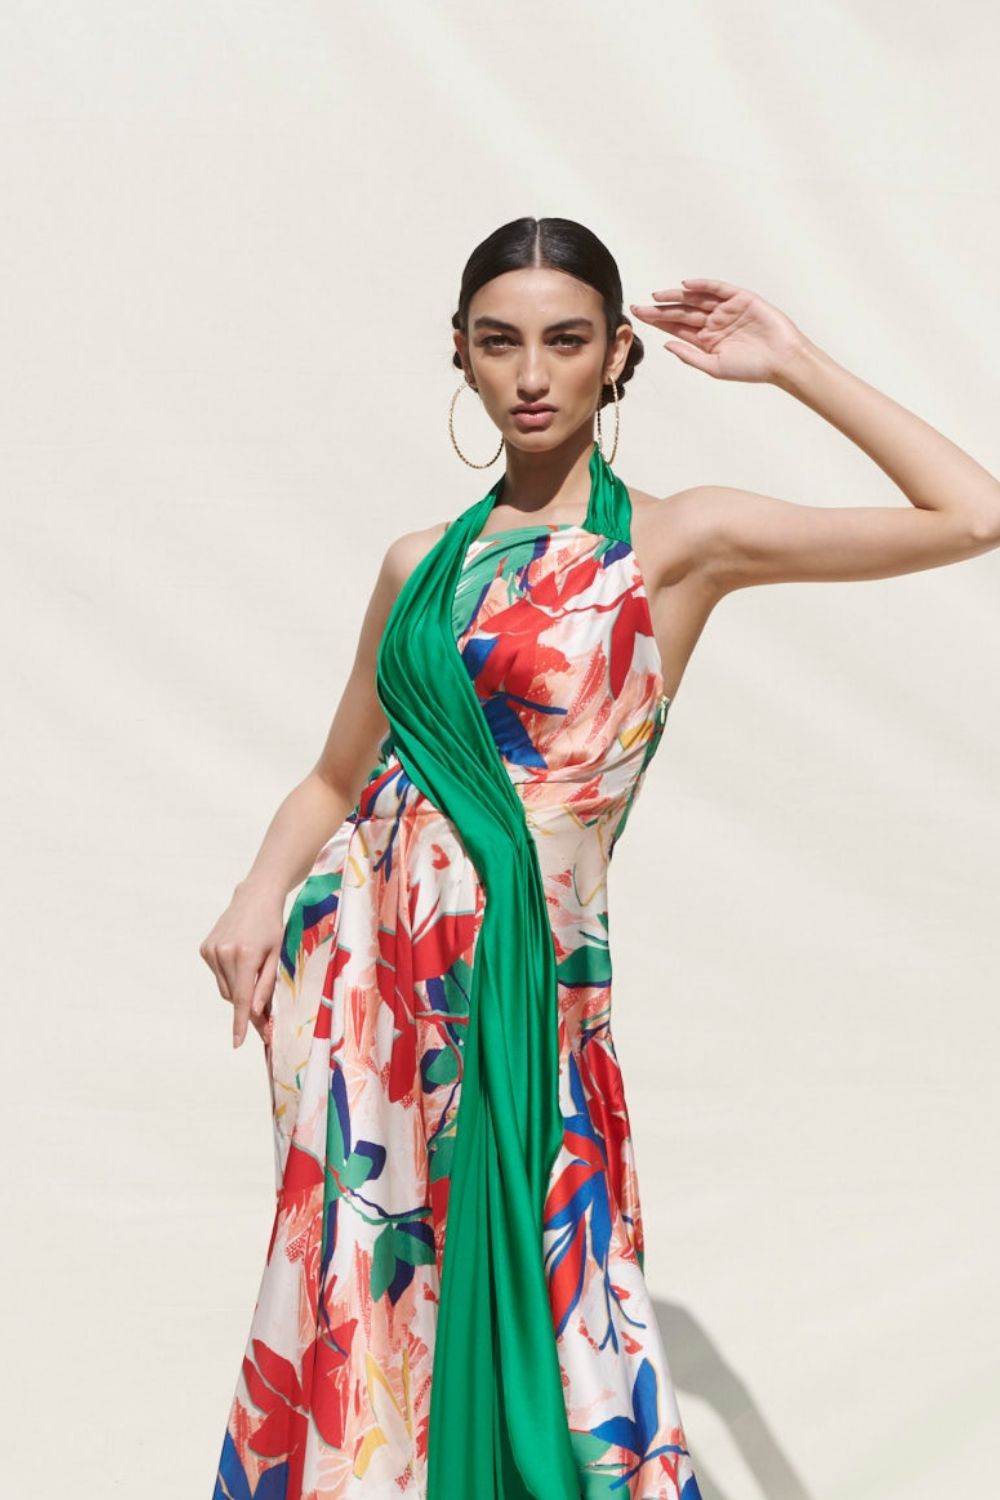 Assymetrical Drape Dress With A Green Solid Drape On Its One Side